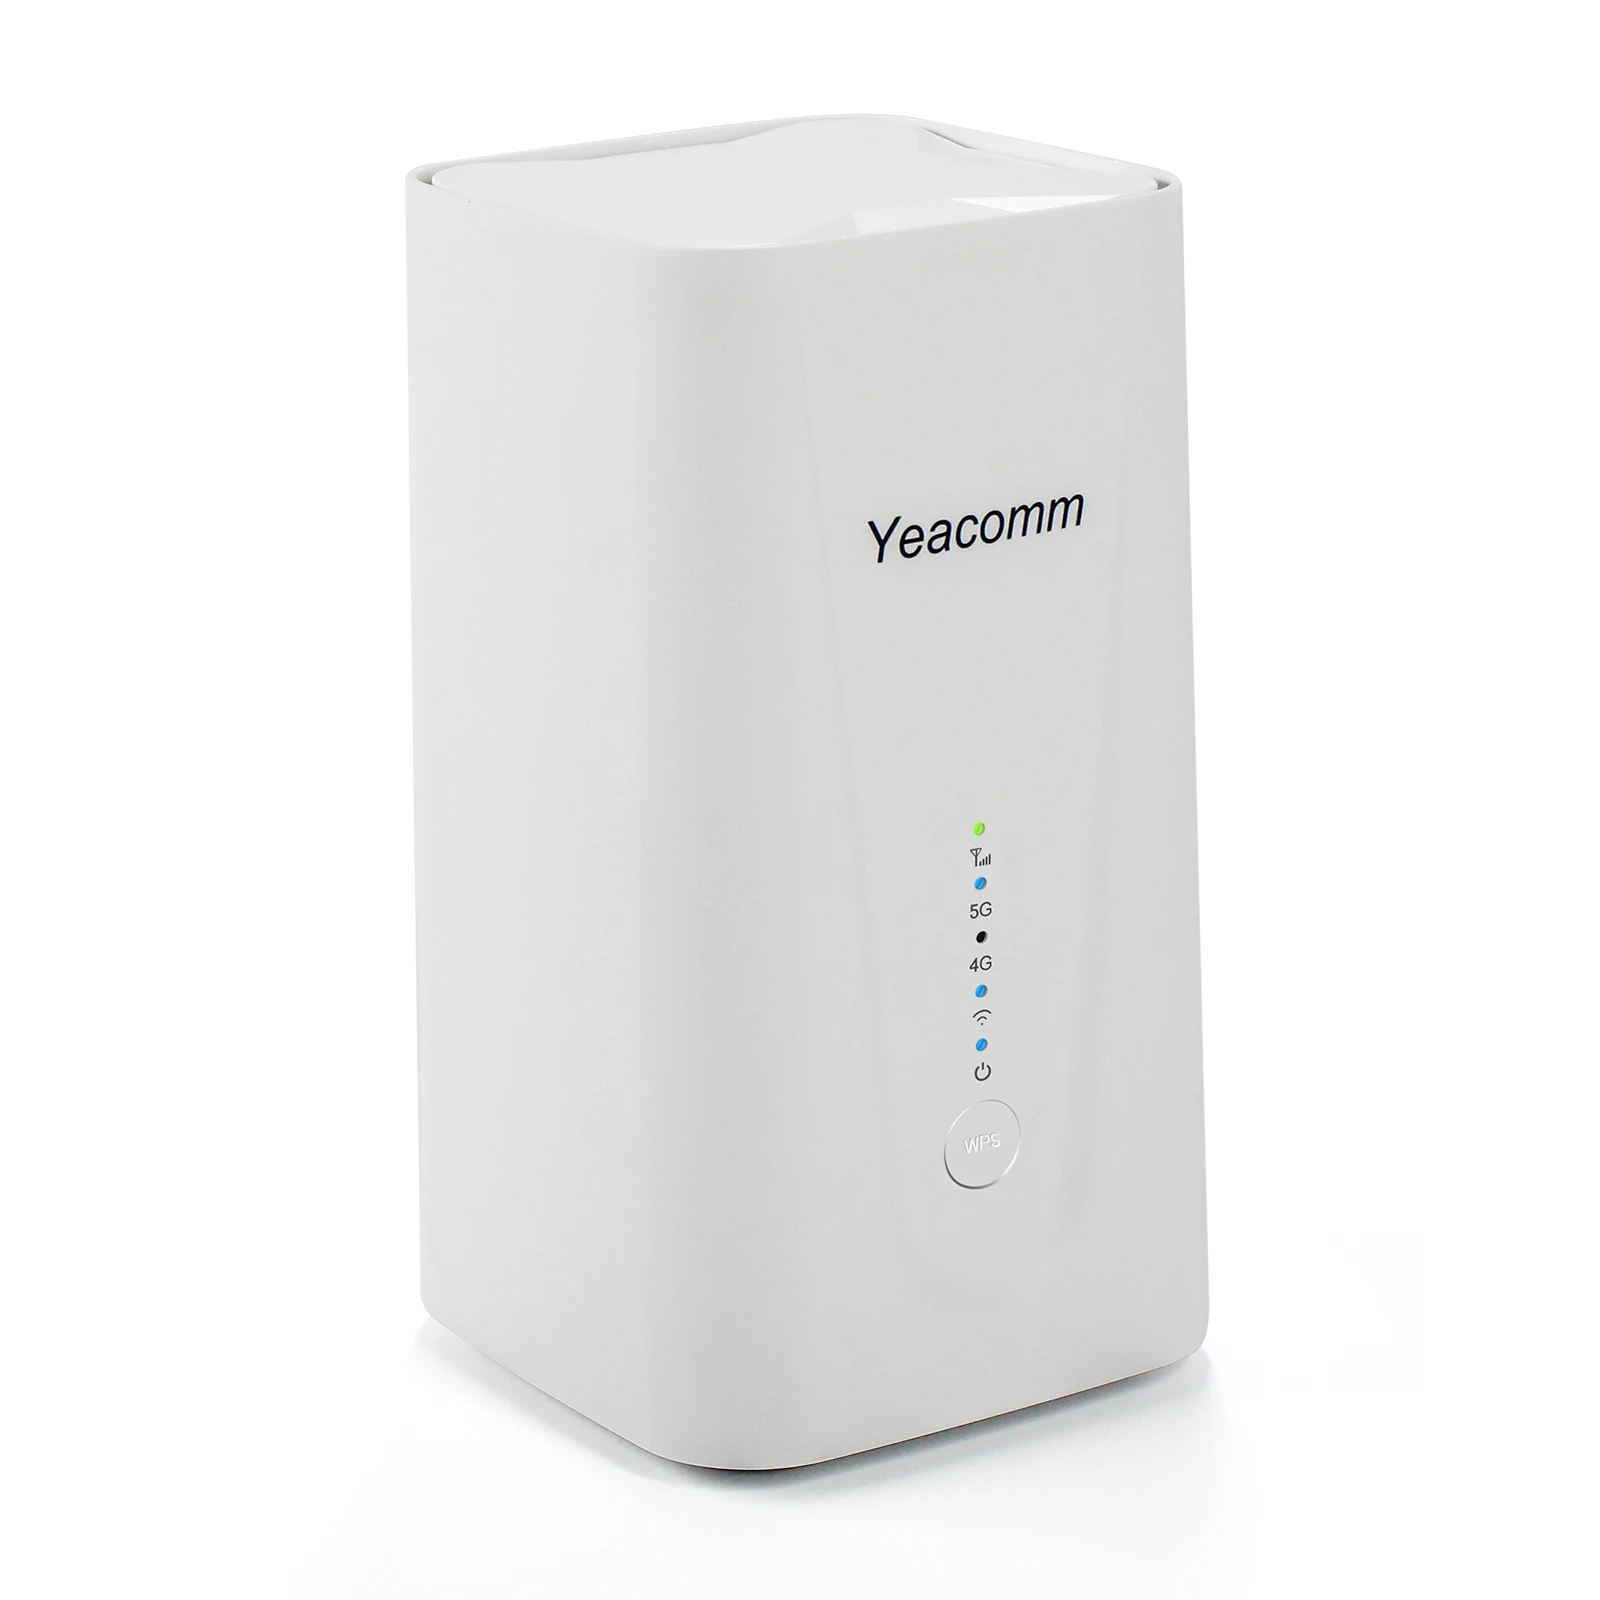 

Support SA NSA Yeacomm NR330 Gigabit VoLTE VoNR WIFI6 AX3600 5G CPE Router Support T-Mobile Verizon AT&T